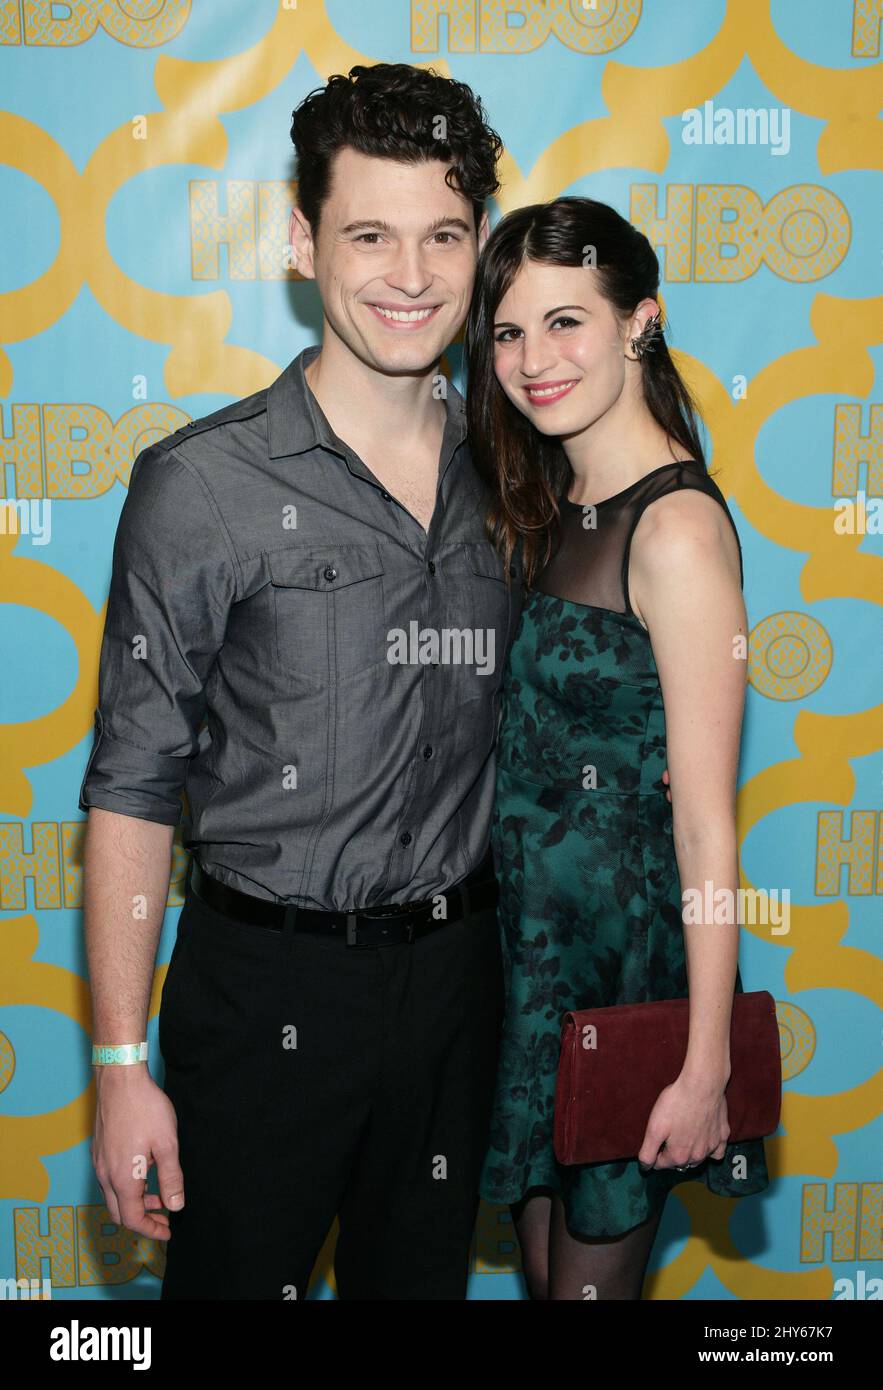 Bryan Dechart, Amelia Rose Blaire attends the HBO After Party for The  Golden Globe Awards 2015, Circa 55 Restaurant at the Beverly Hilton Hotel,  January 11, 2015 Beverly Hills, CA Stock Photo - Alamy